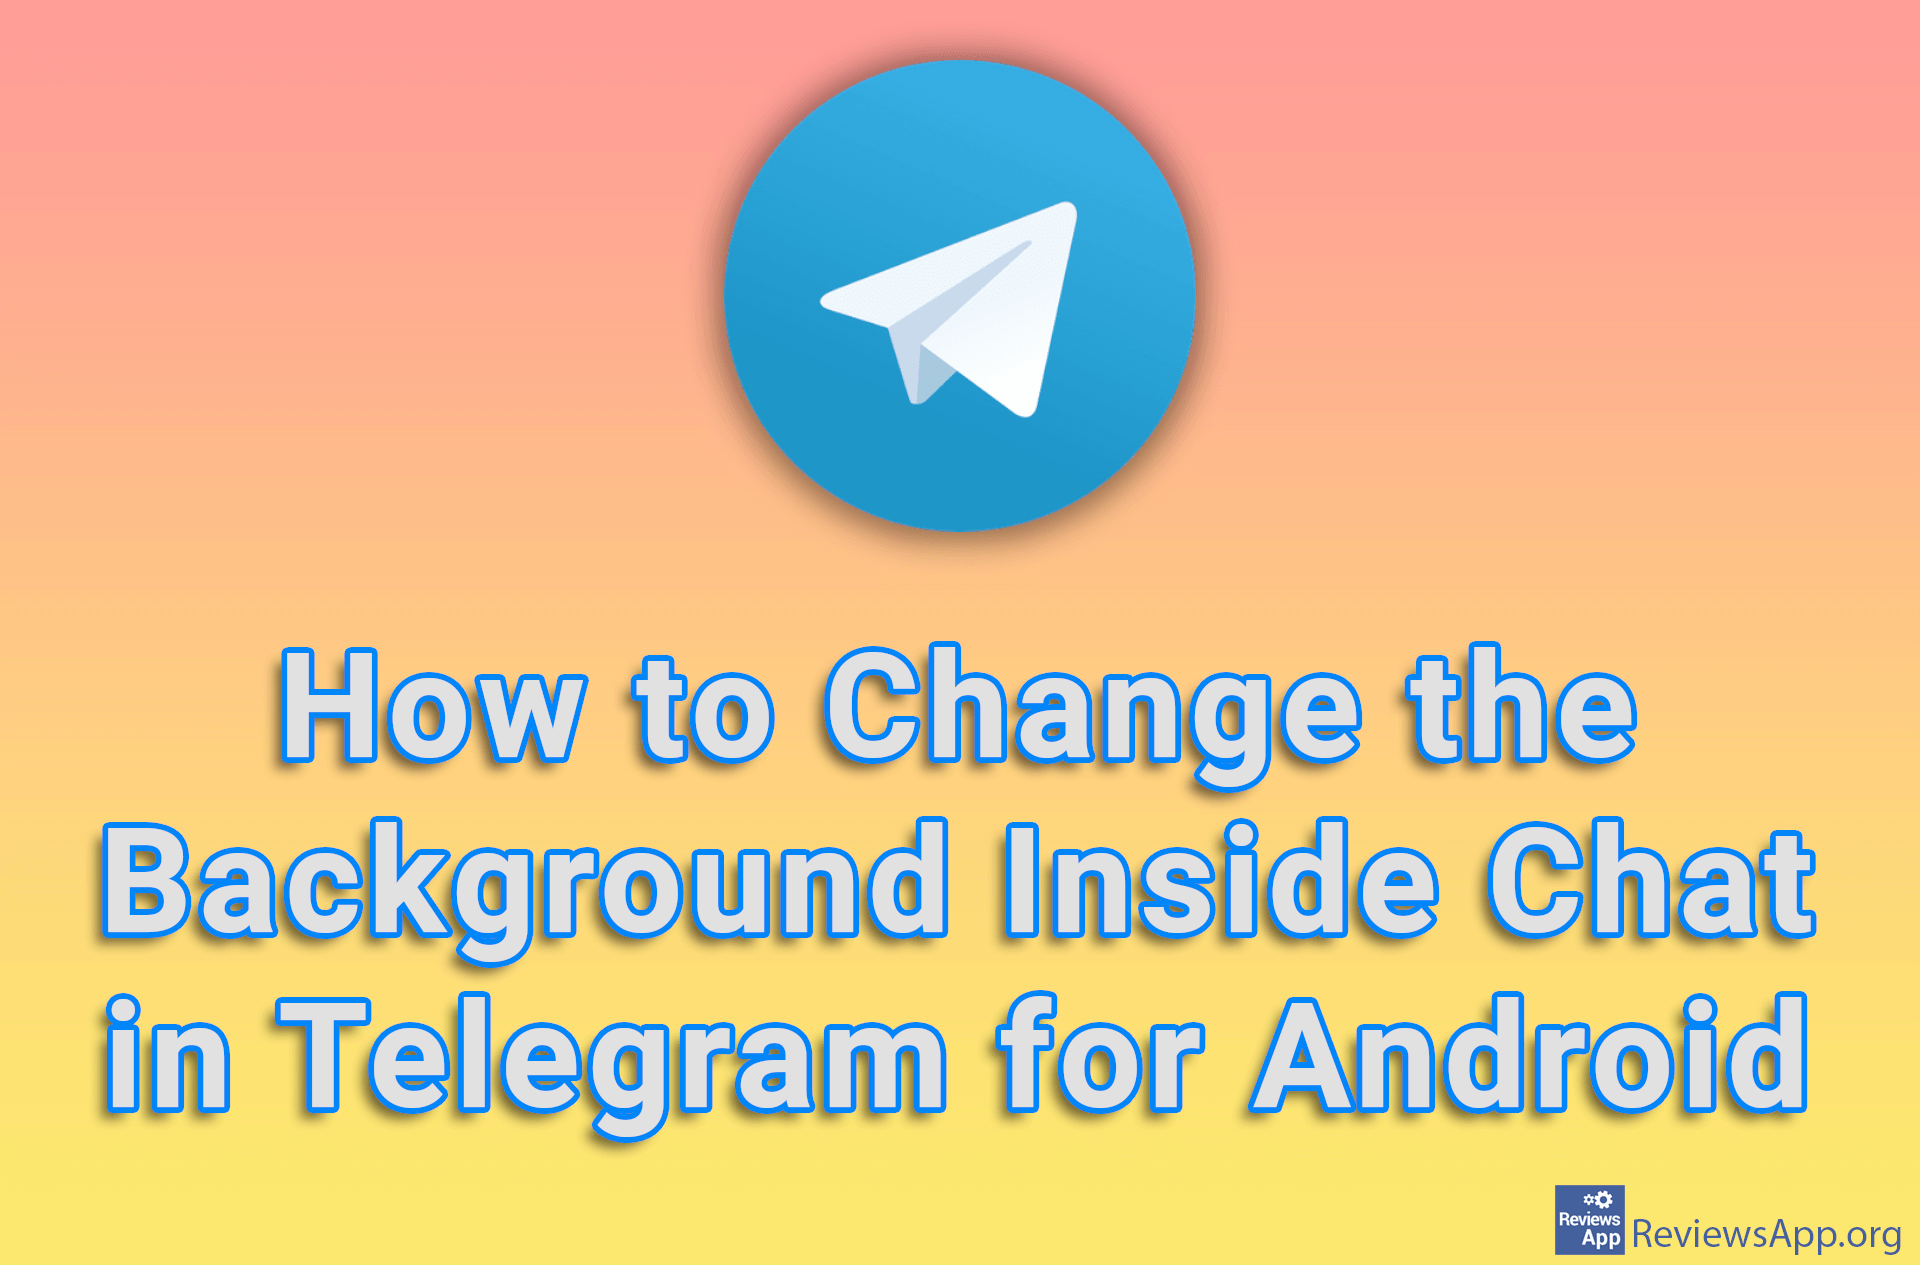 How to Change the Background Inside Chat in Telegram for Android